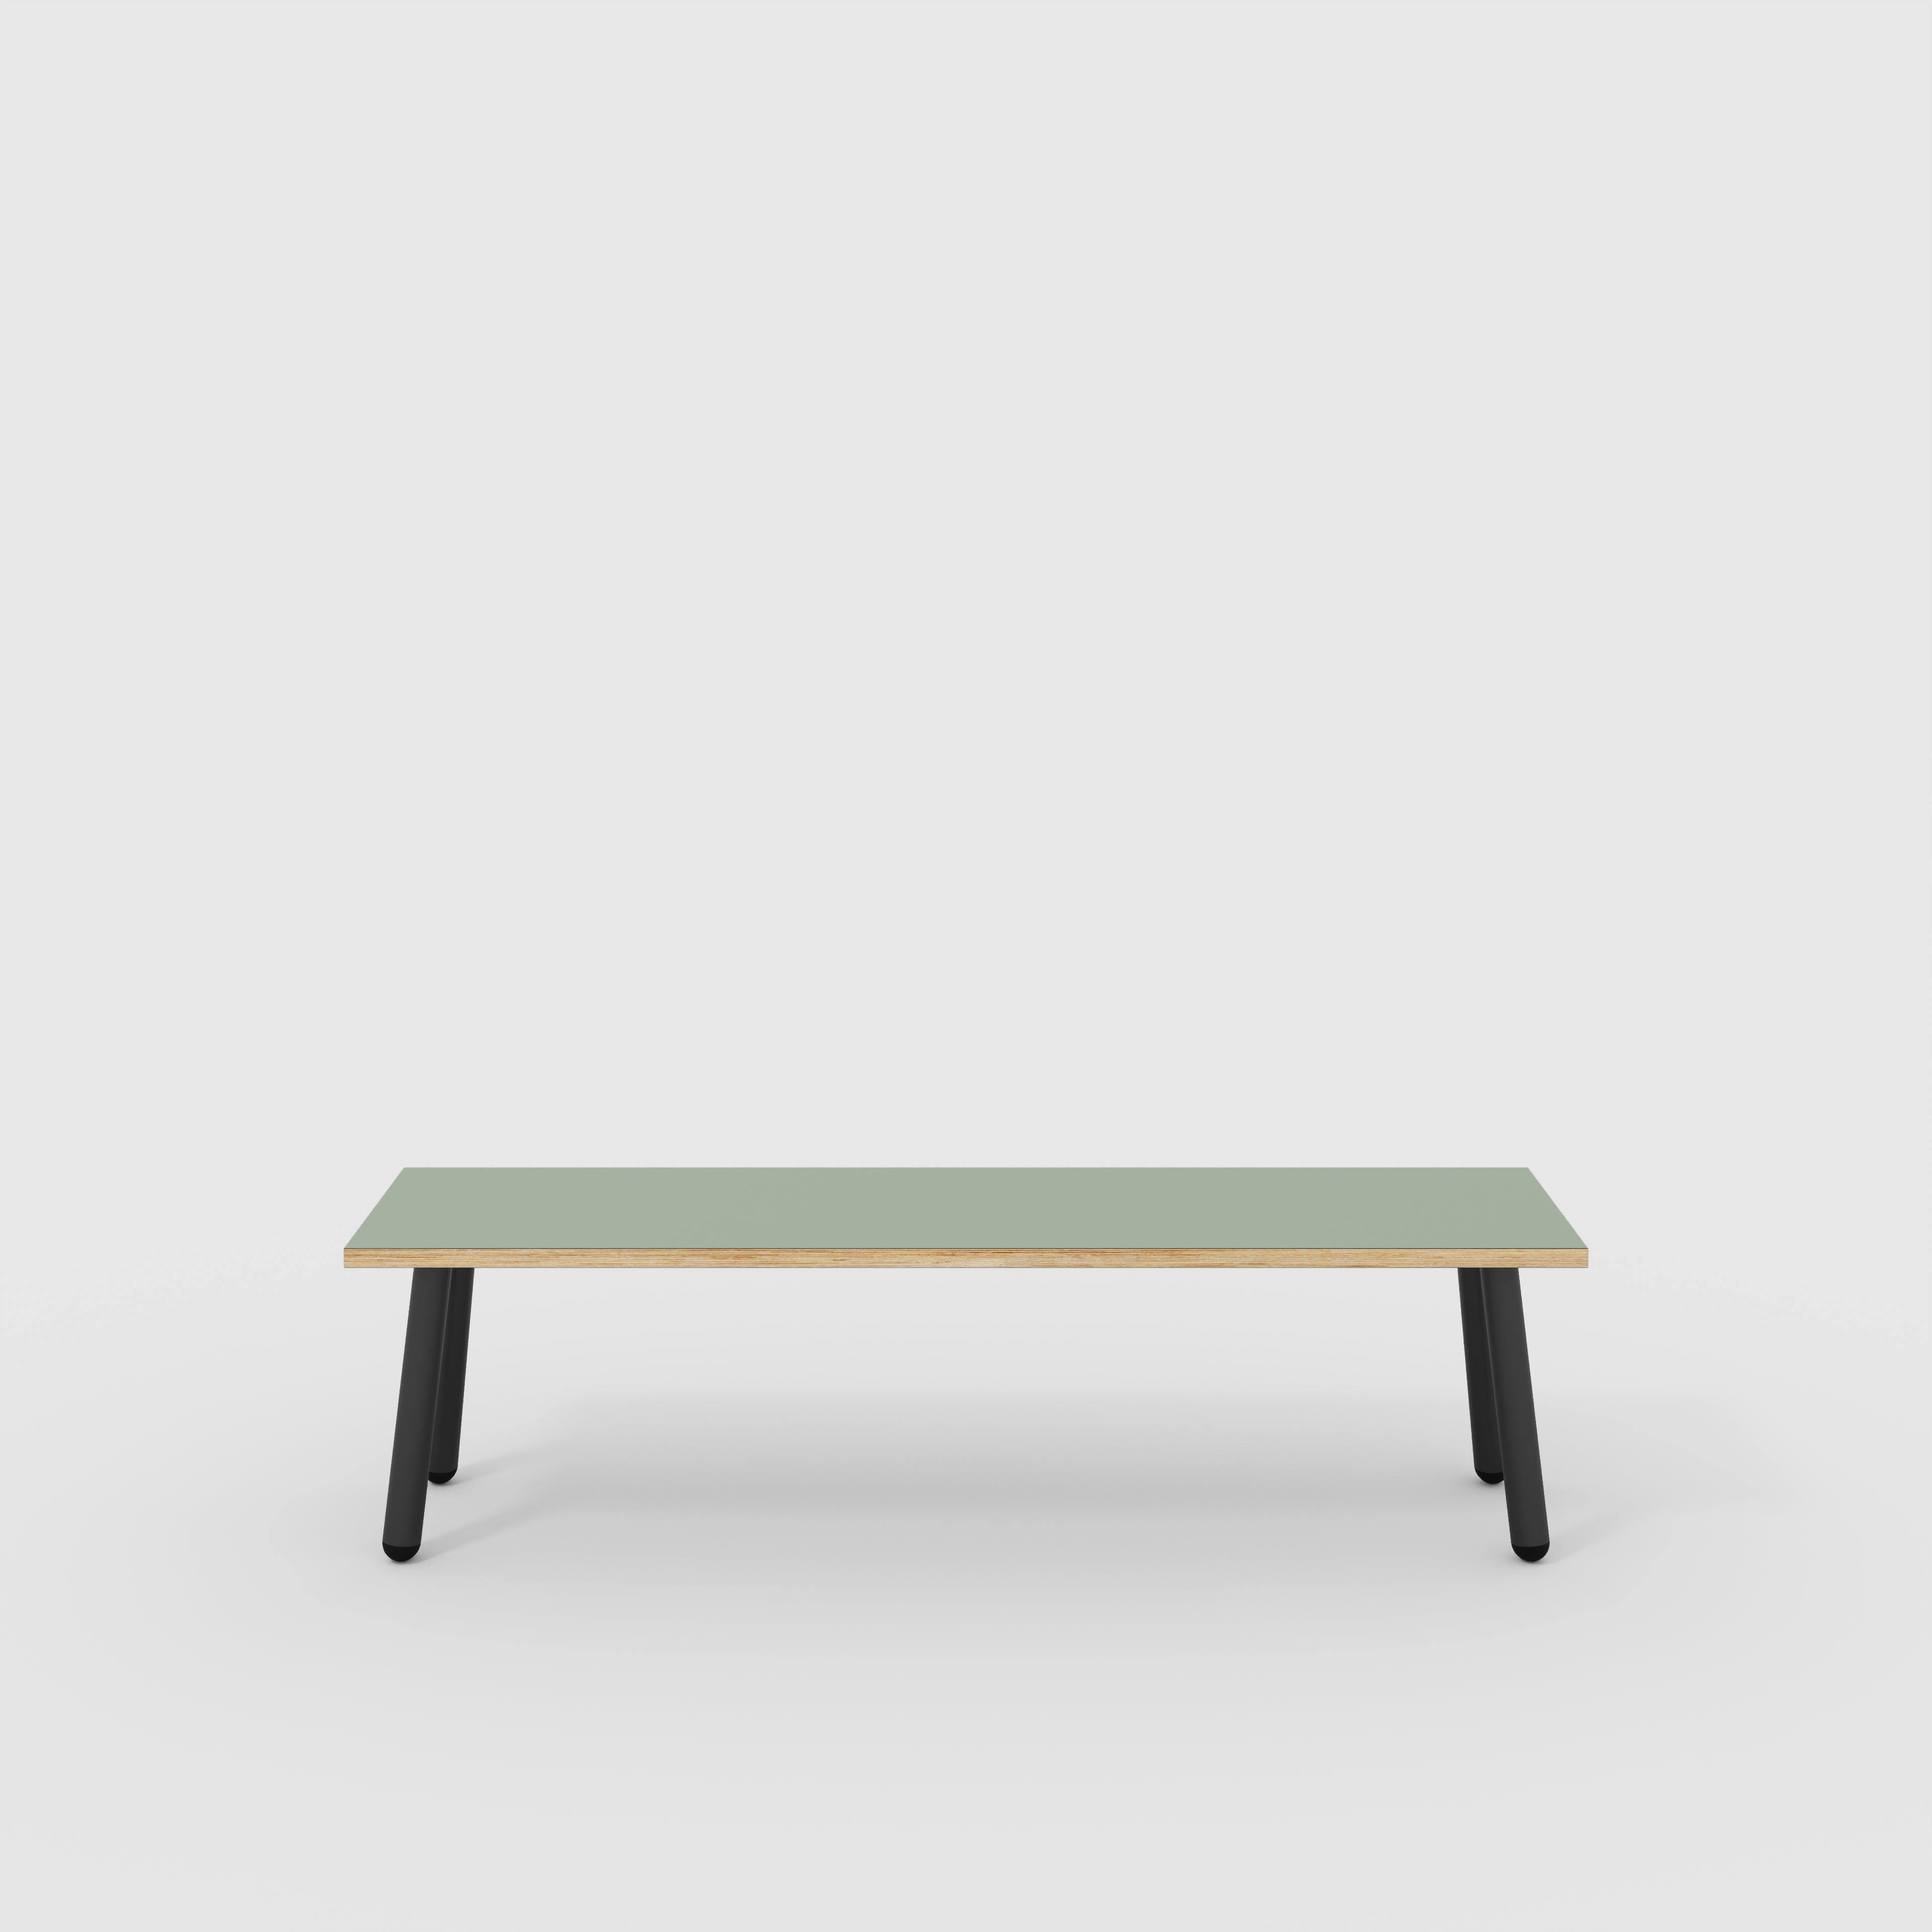 Bench Seat with Black Round Single Pin Legs - Formica Green Slate - 1600(w) x 400(d)